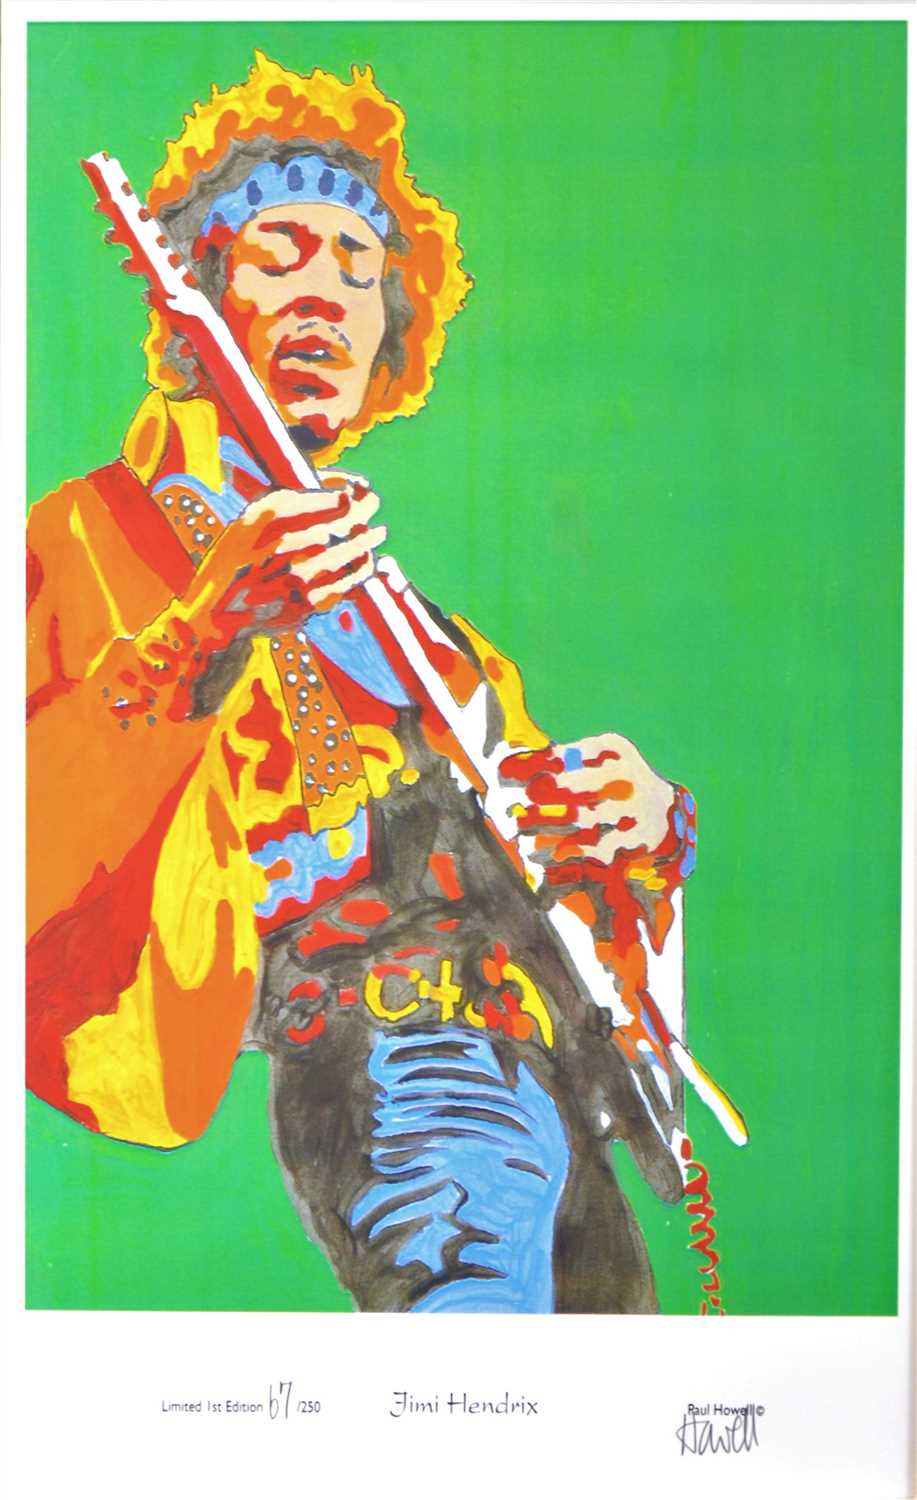 Lot 693 - Jimi Hendrix; limited edition print by Paul Howell 33.5cm by 27cm.